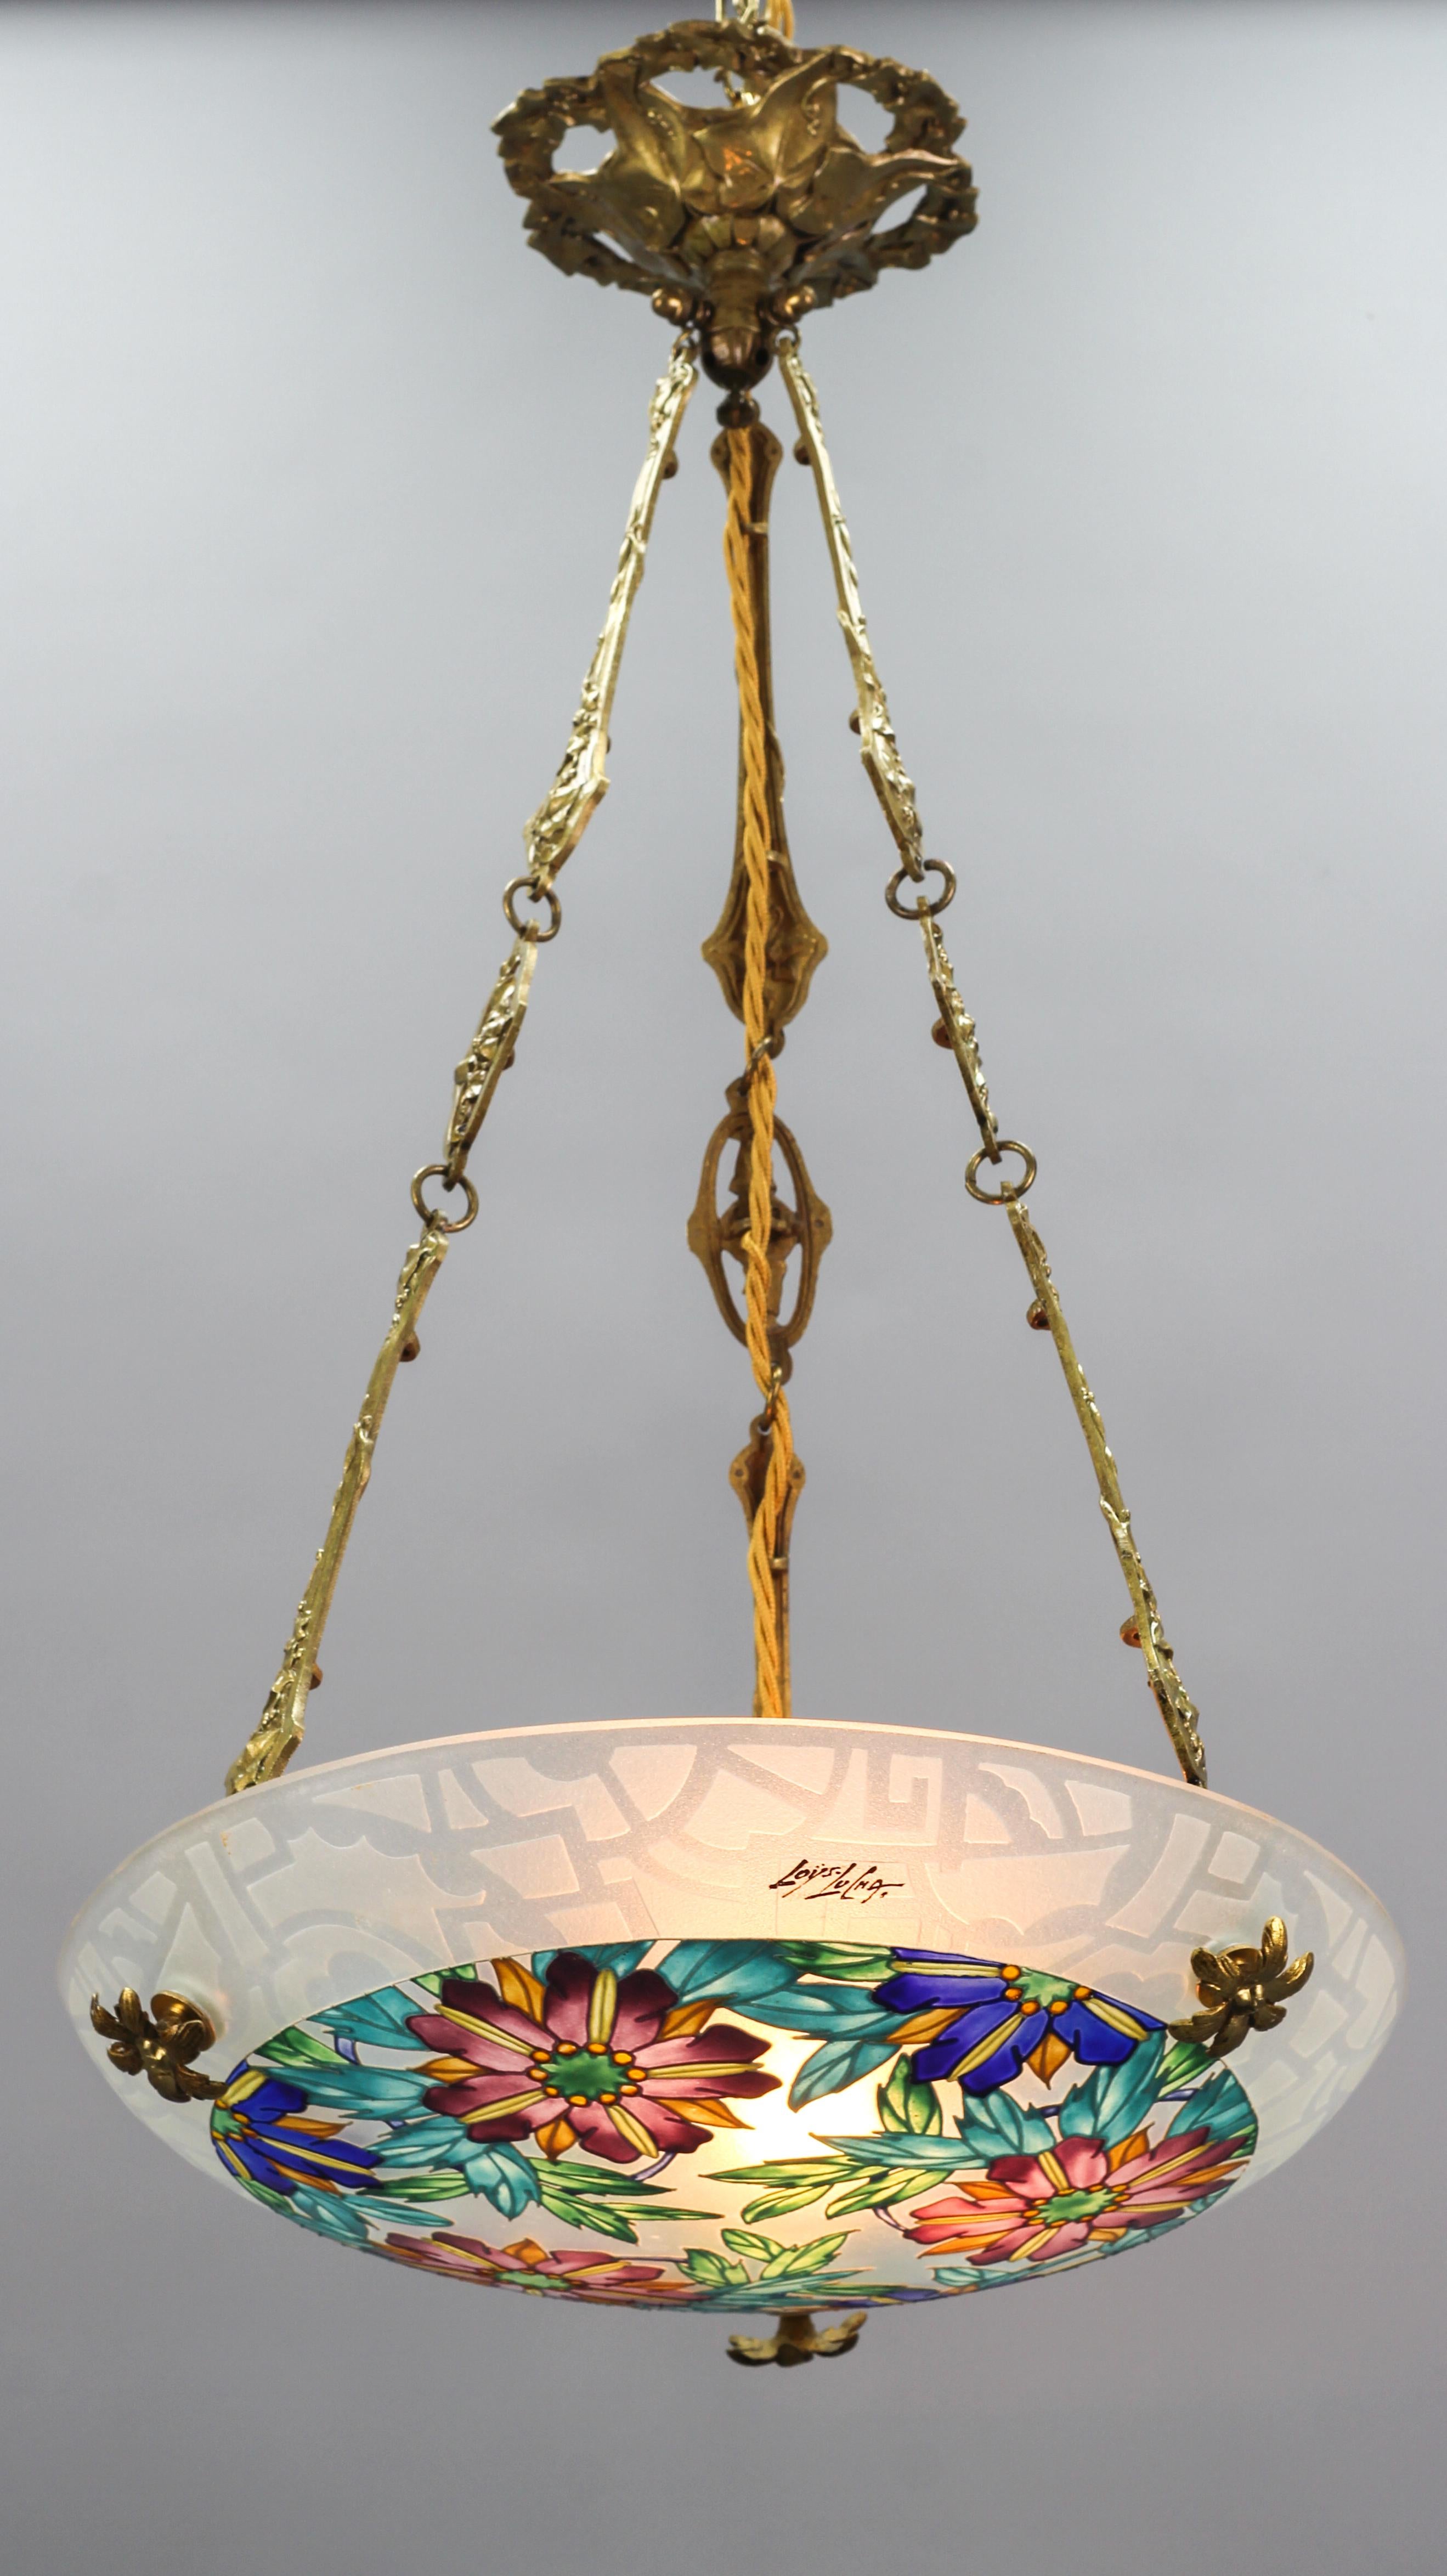 This beautiful Art Deco molded, frosted, and painted thick glass ceiling light features a floral design in purple, yellow, orange, blue, and green colors, signed “Loys Lucha”. The outer edge is decorated with a geometric design. The colorful pendant